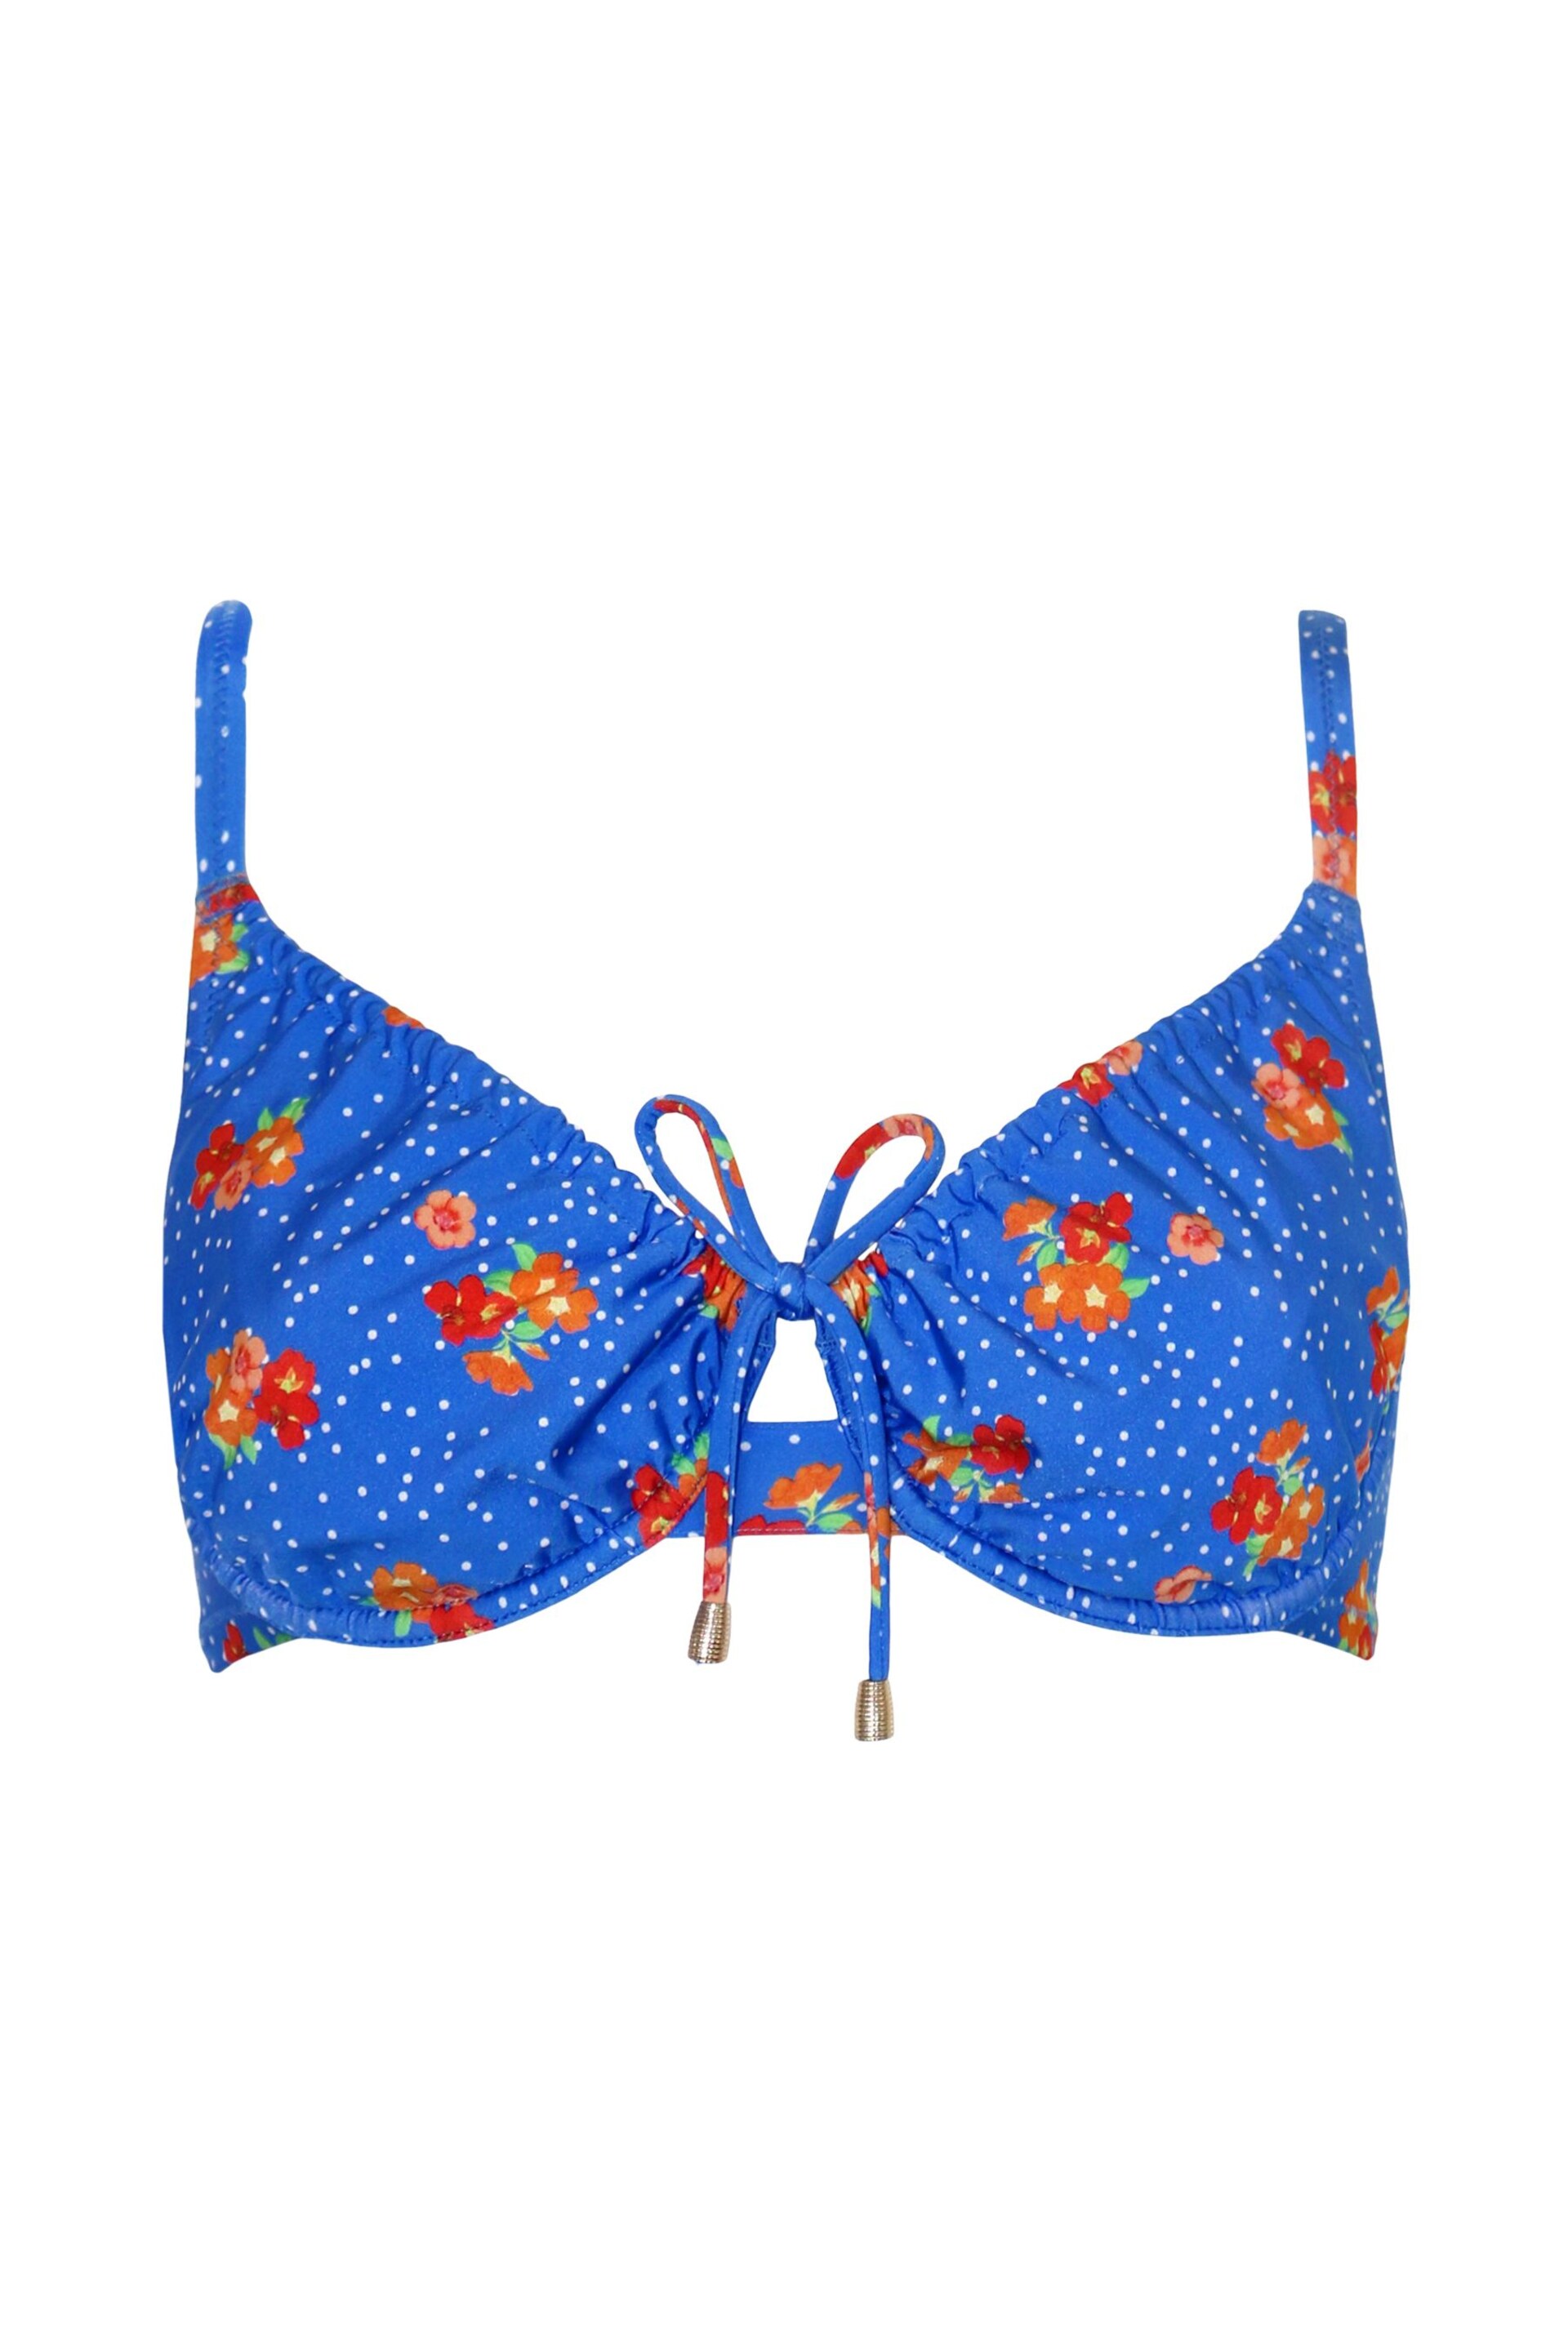 Pour Moi Blue Santa Cruz Underwired Non Padded Adjustable Top - Image 4 of 5